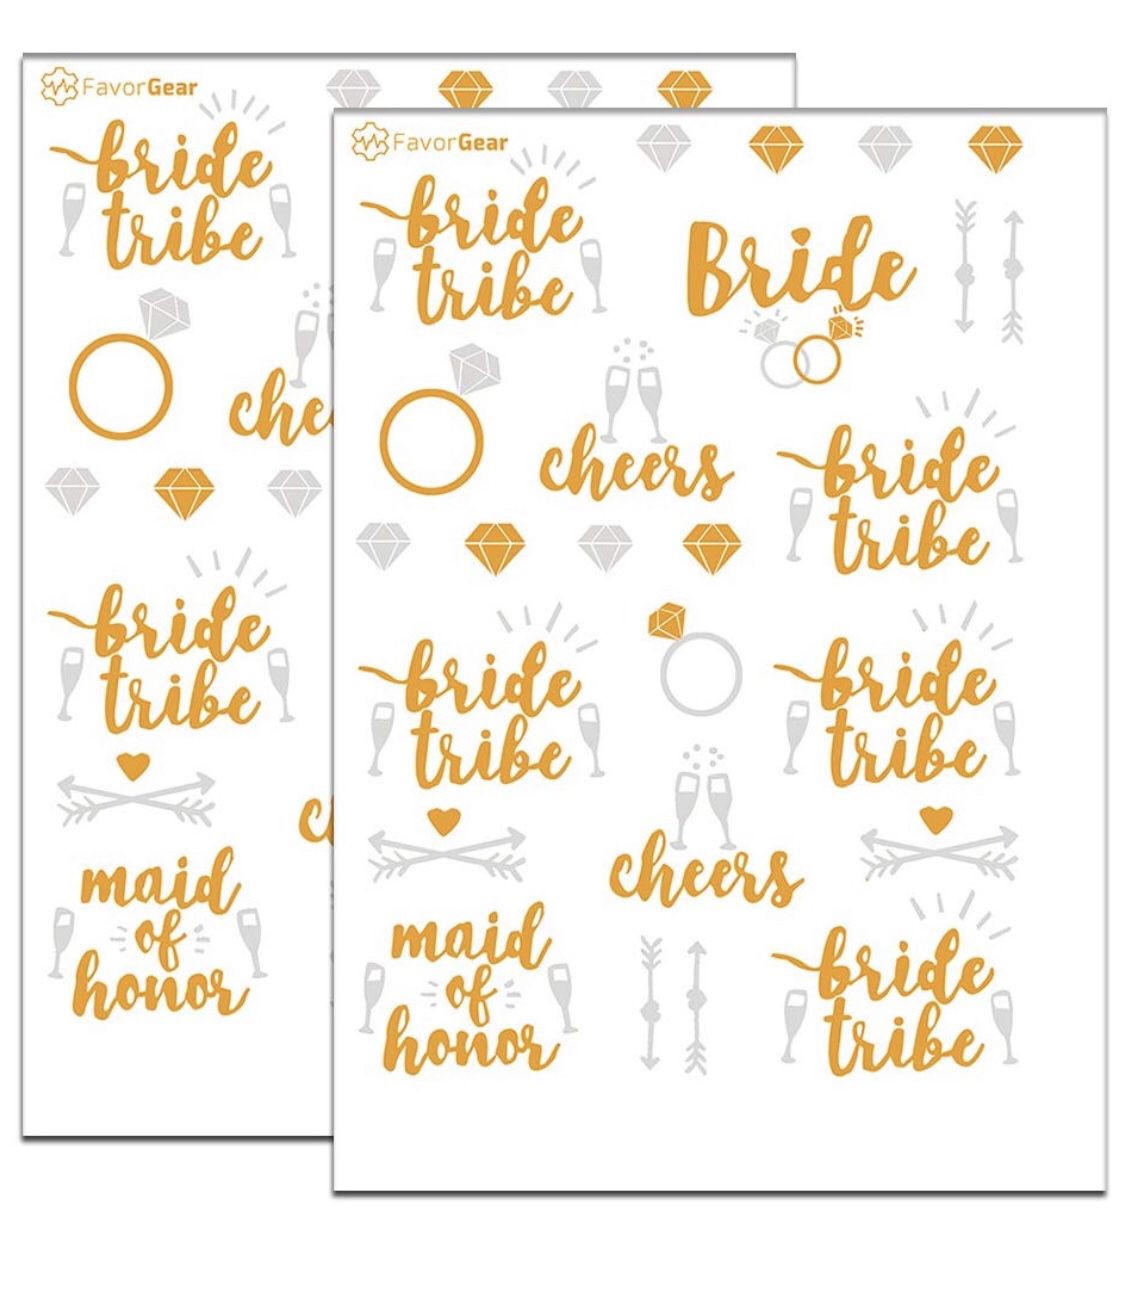 Bachelorette Party Flash Tattoos- Bride Tribe, Maid of Honor ,Cheers & 52 Styles Unique Designed(2 Sheets) Temporary Tattoos - Brida Shower Favor Wed